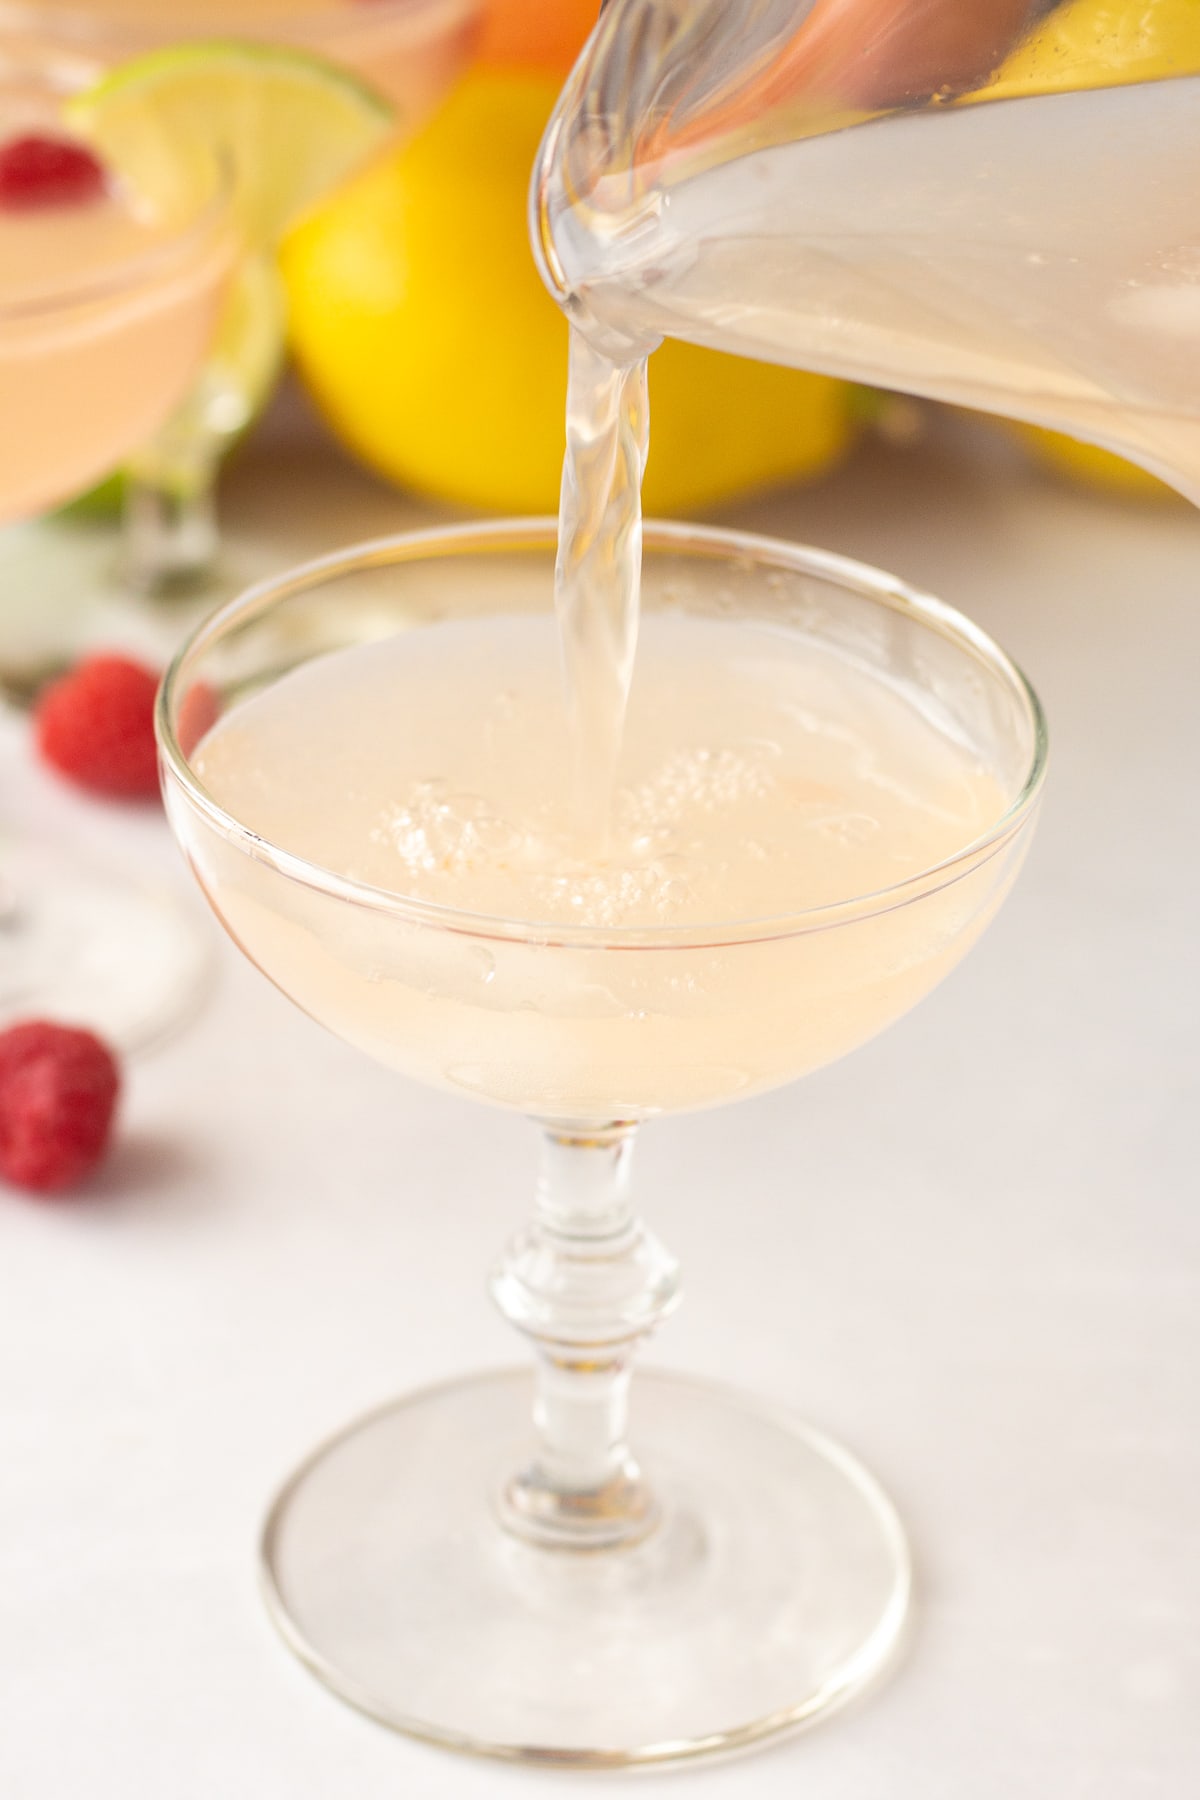 pouring a pink citrus mocktail from a glass pitcher into a champagne glass.